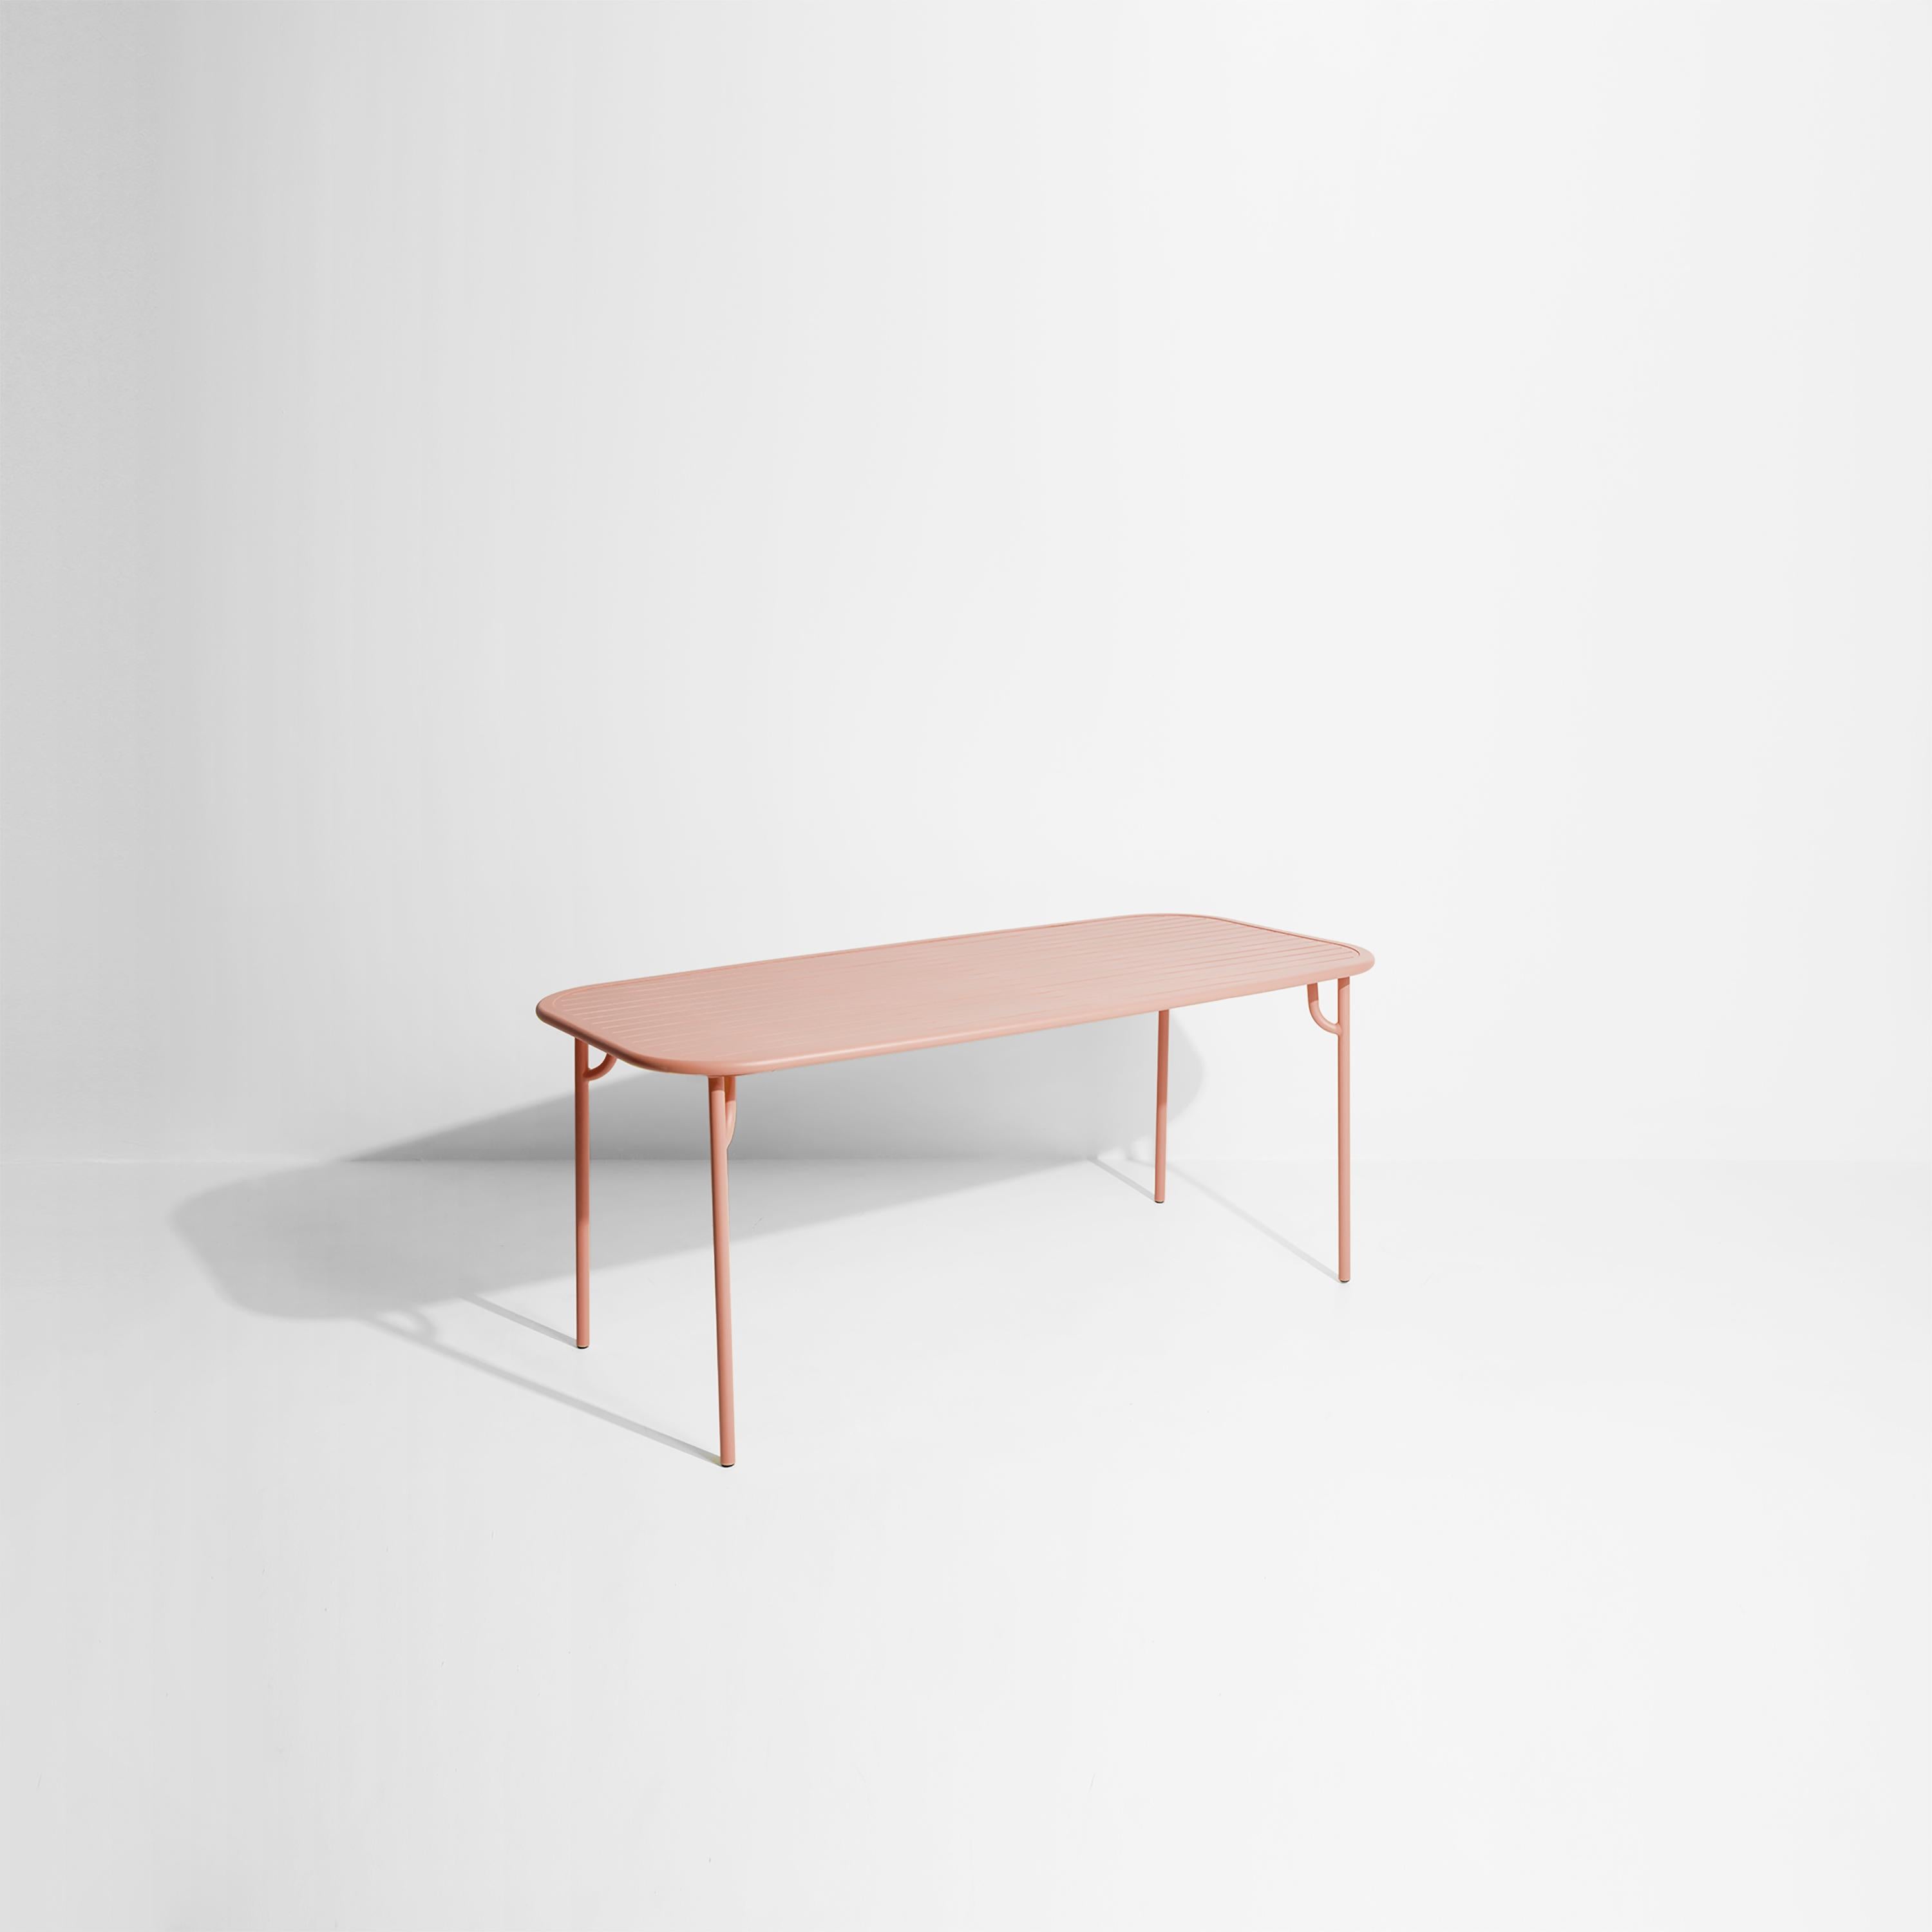 Petite Friture Week-End Medium Plain Rectangular Dining Table in Blush Aluminium by Studio BrichetZiegler, 2017

The week-end collection is a full range of outdoor furniture, in aluminium grained epoxy paint, matt finish, that includes 18